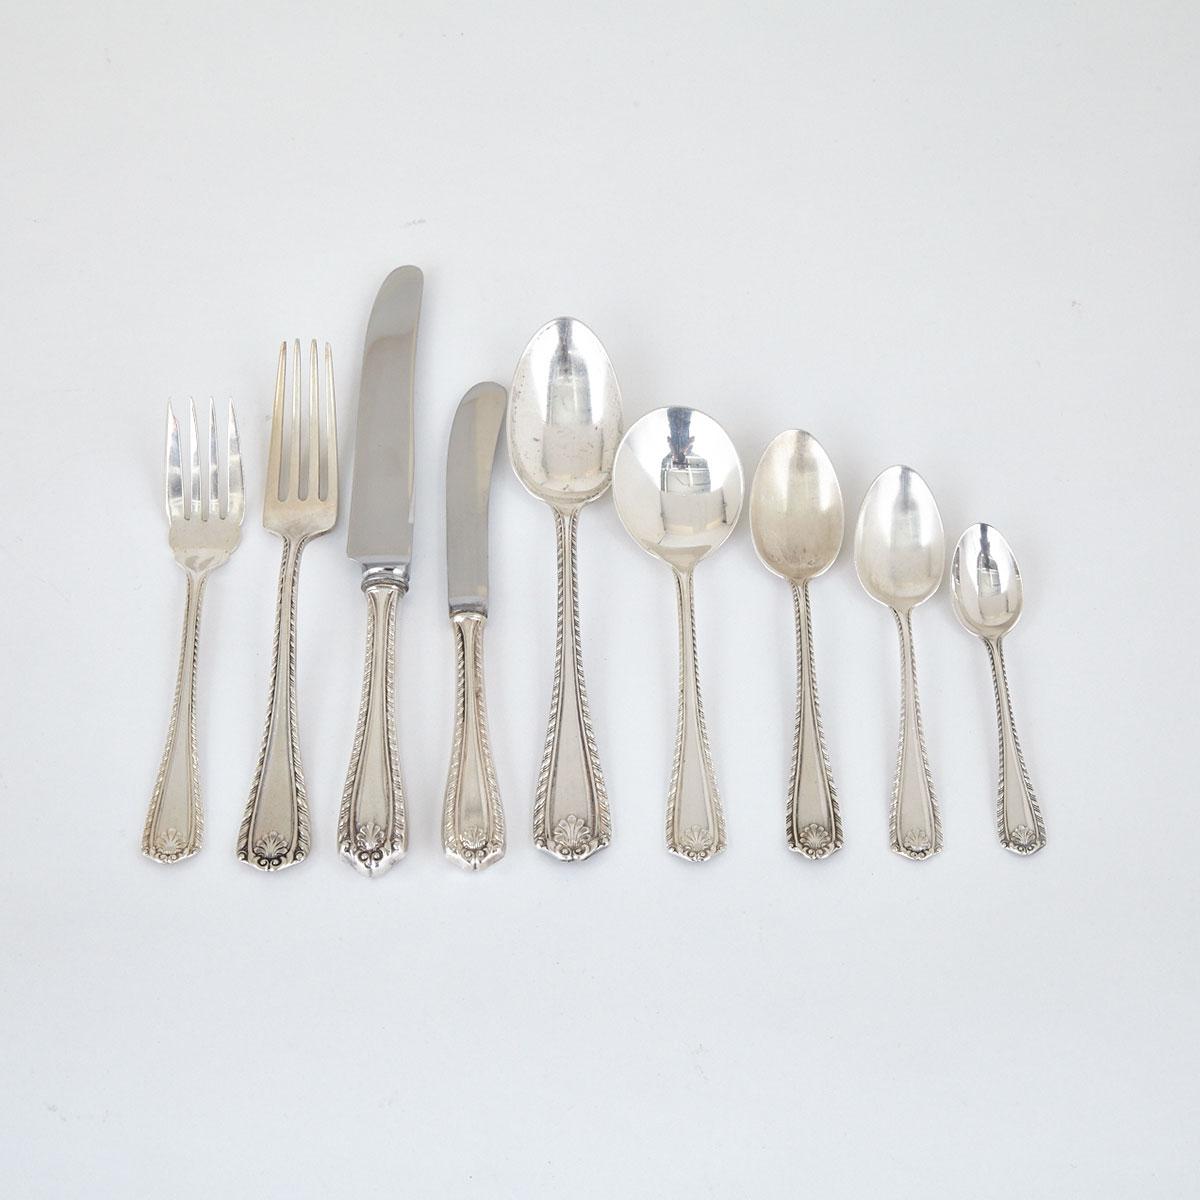 Canadian Silver ‘Avalon’ Pattern Flatware, Henry Birks & Sons, Montreal, Que., 20th century